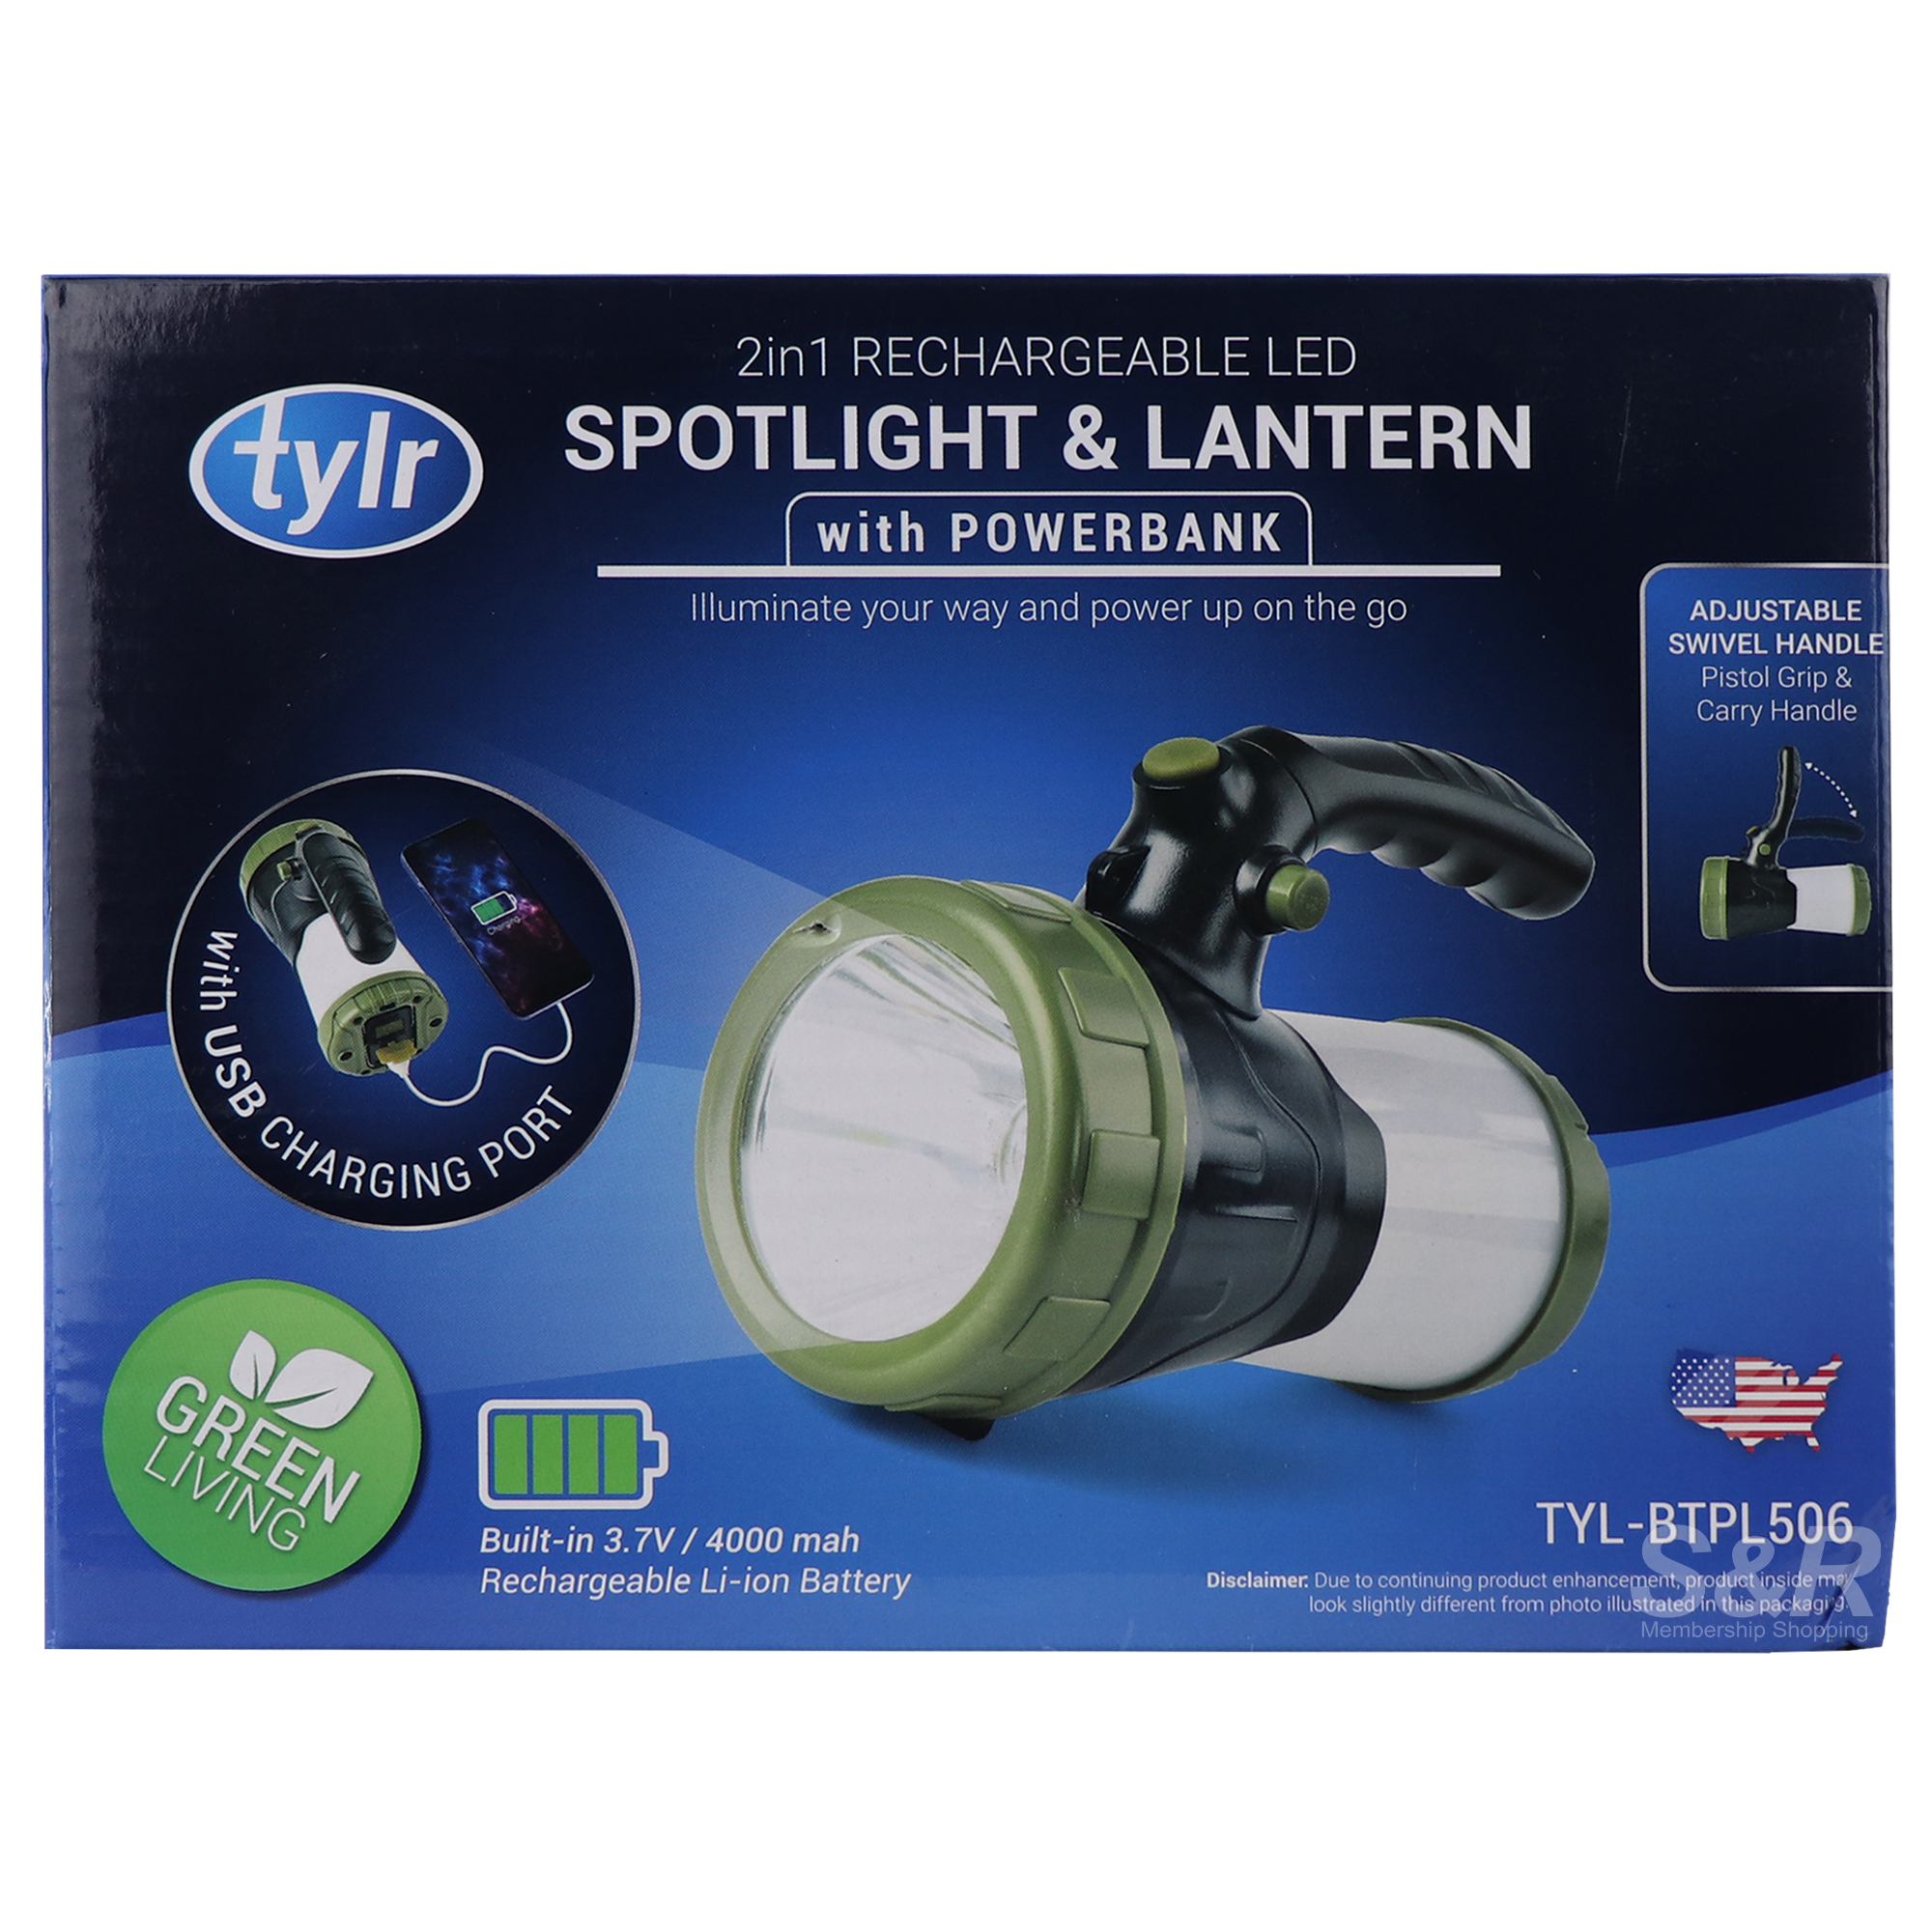 Tylr 2in1 Rechargeable LED Spotlight and Lantern with Powerbank TYL-BTPL506